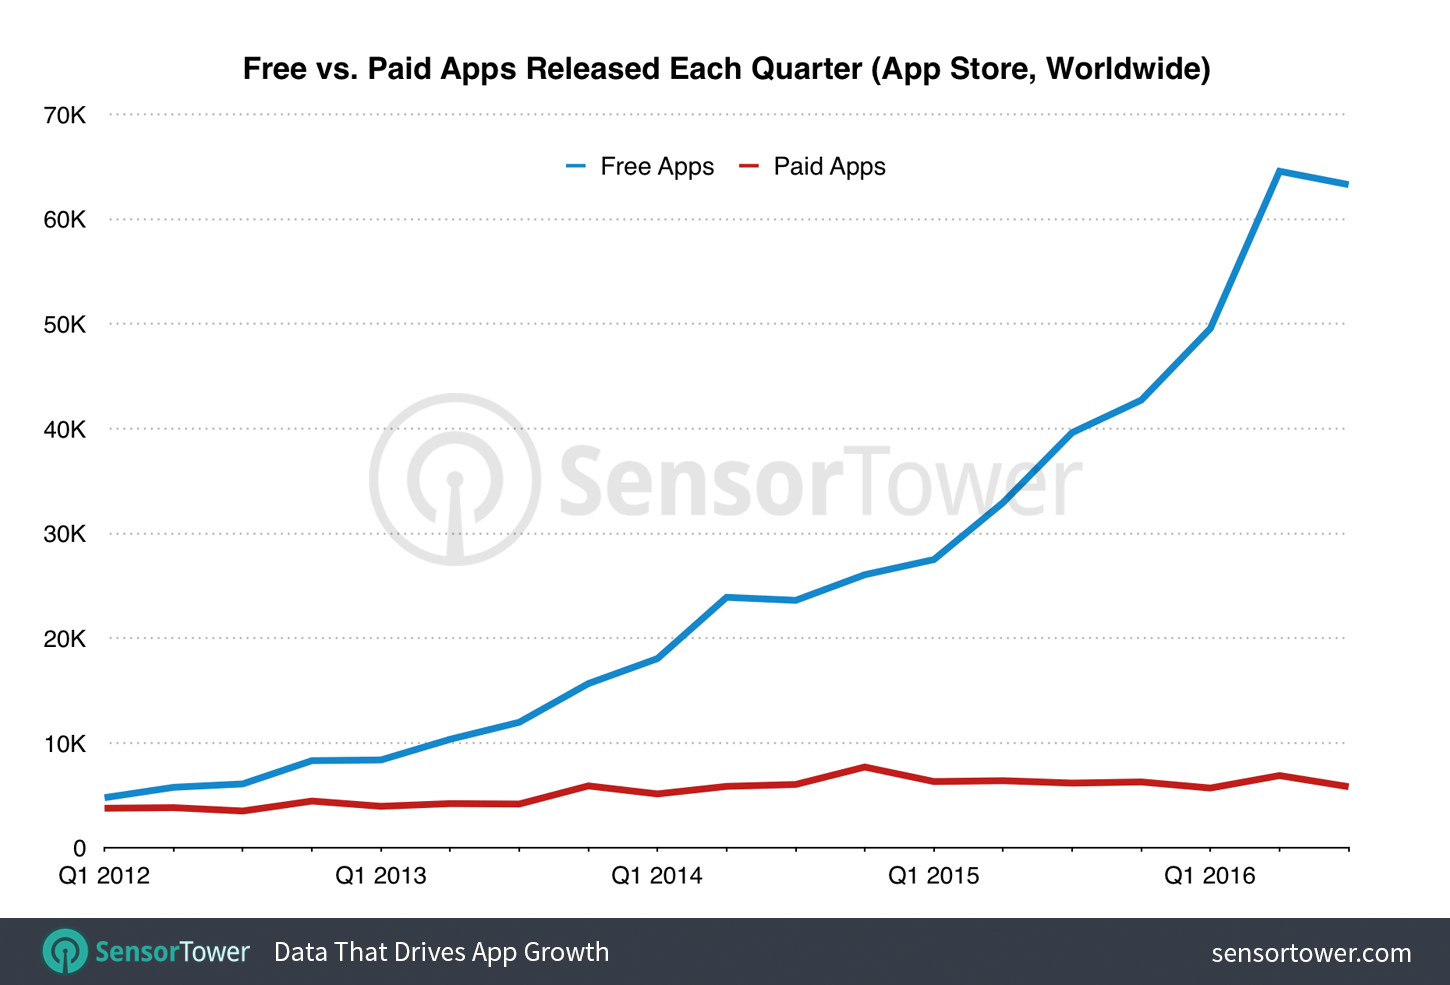 Free vs. Paid Games Released Each Quarter Since 2012 on the U.S. App Store